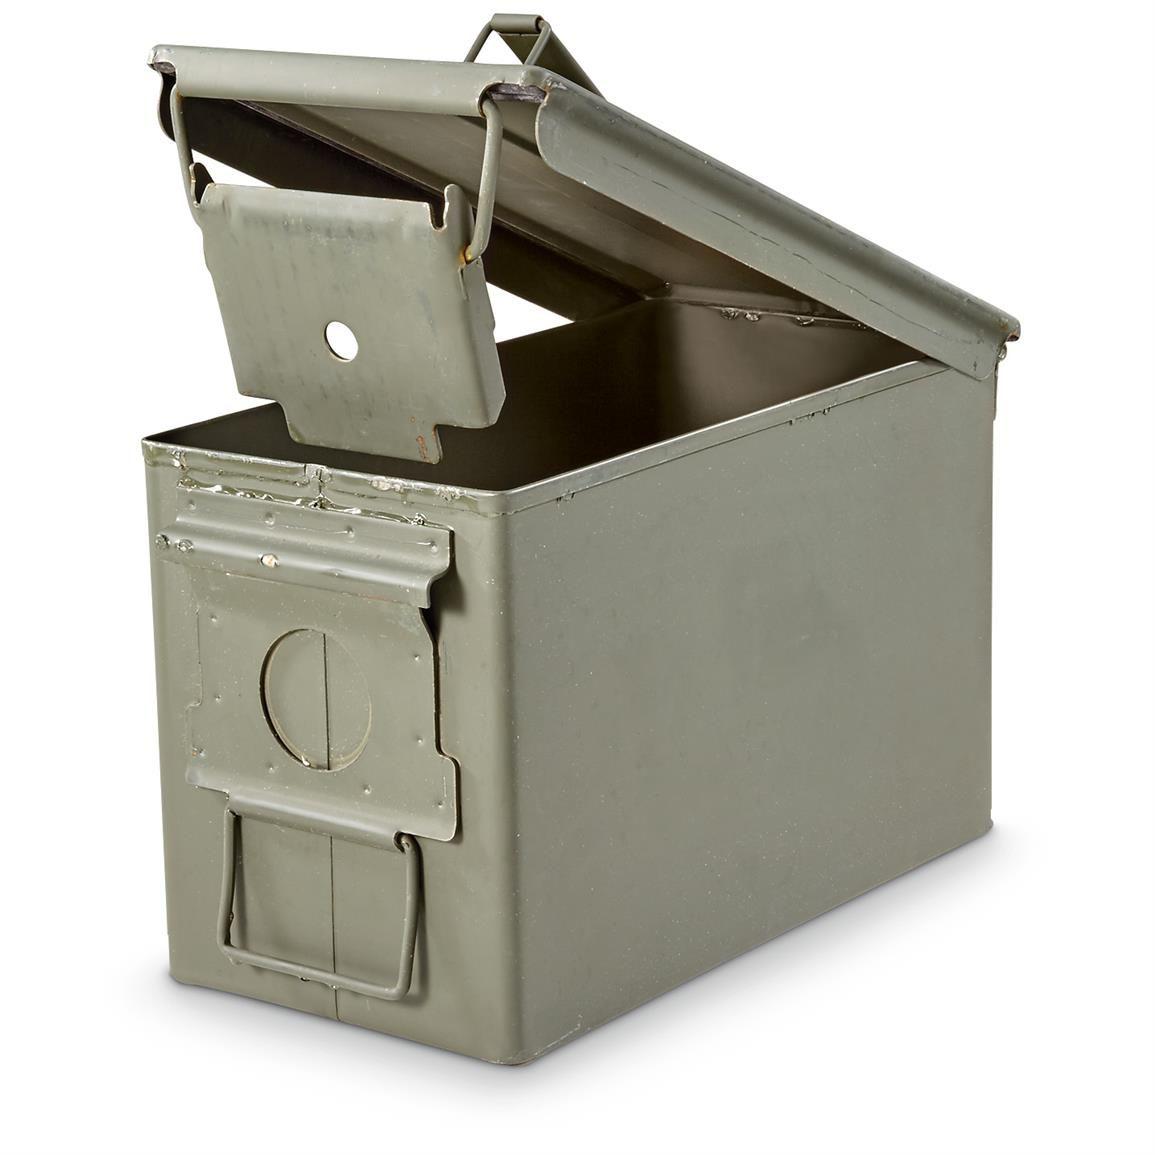 Ammo Box Logo - Military Surplus Ammo Cans & Military Storage | Sportsman's Guide